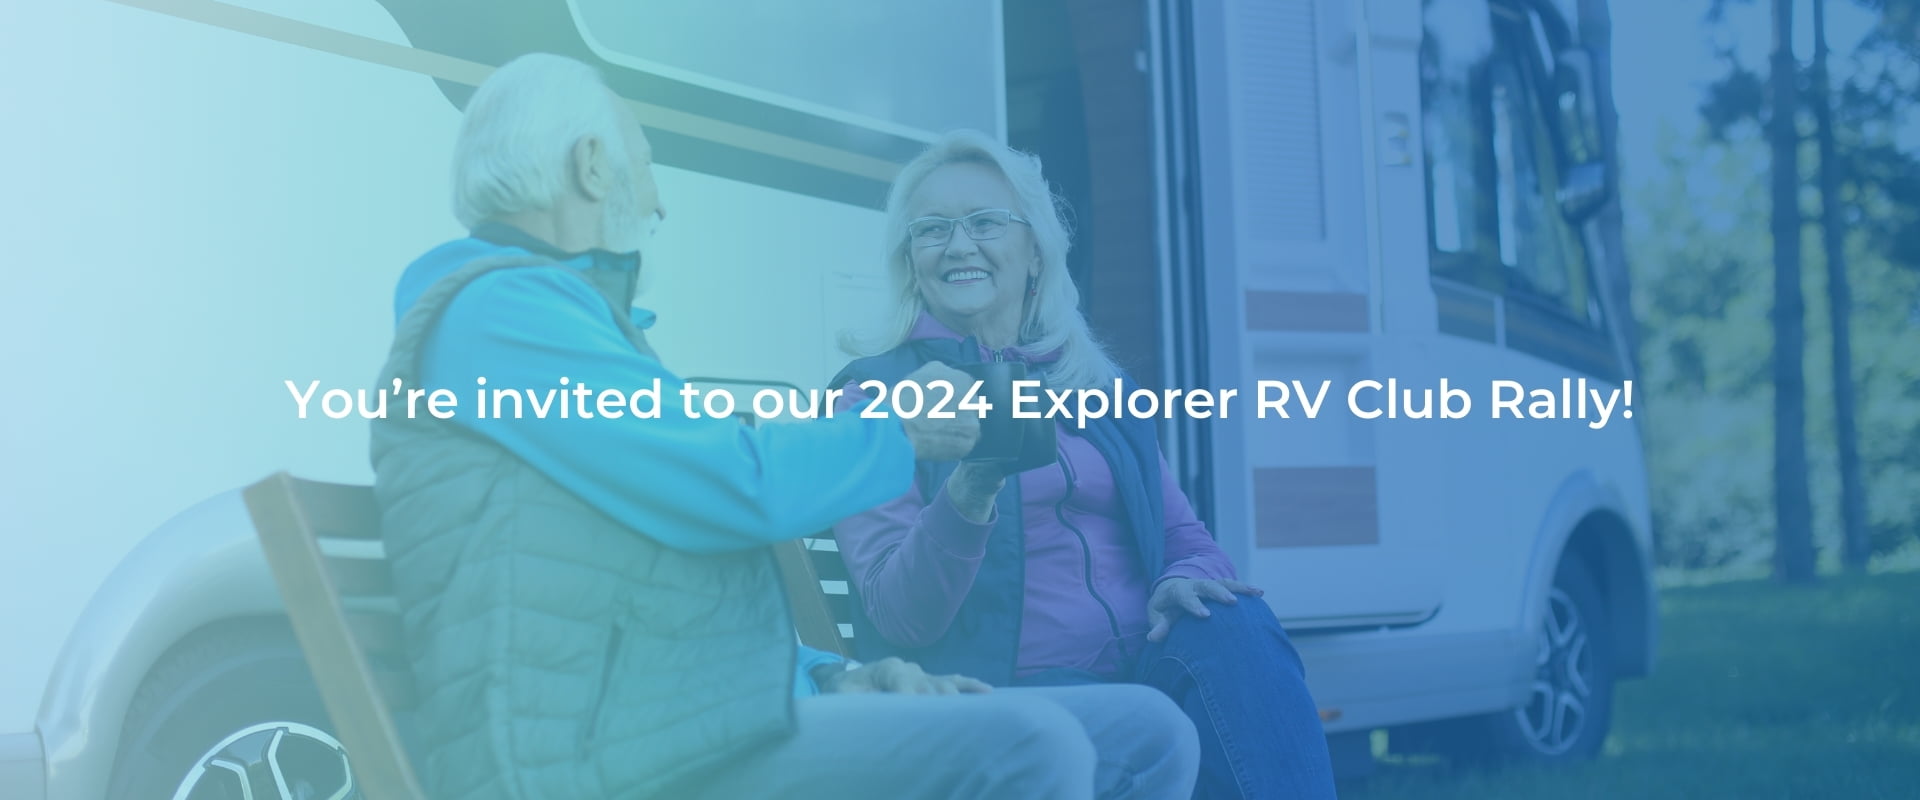 You're invited to our 2024 Explorer RV Club Rally!